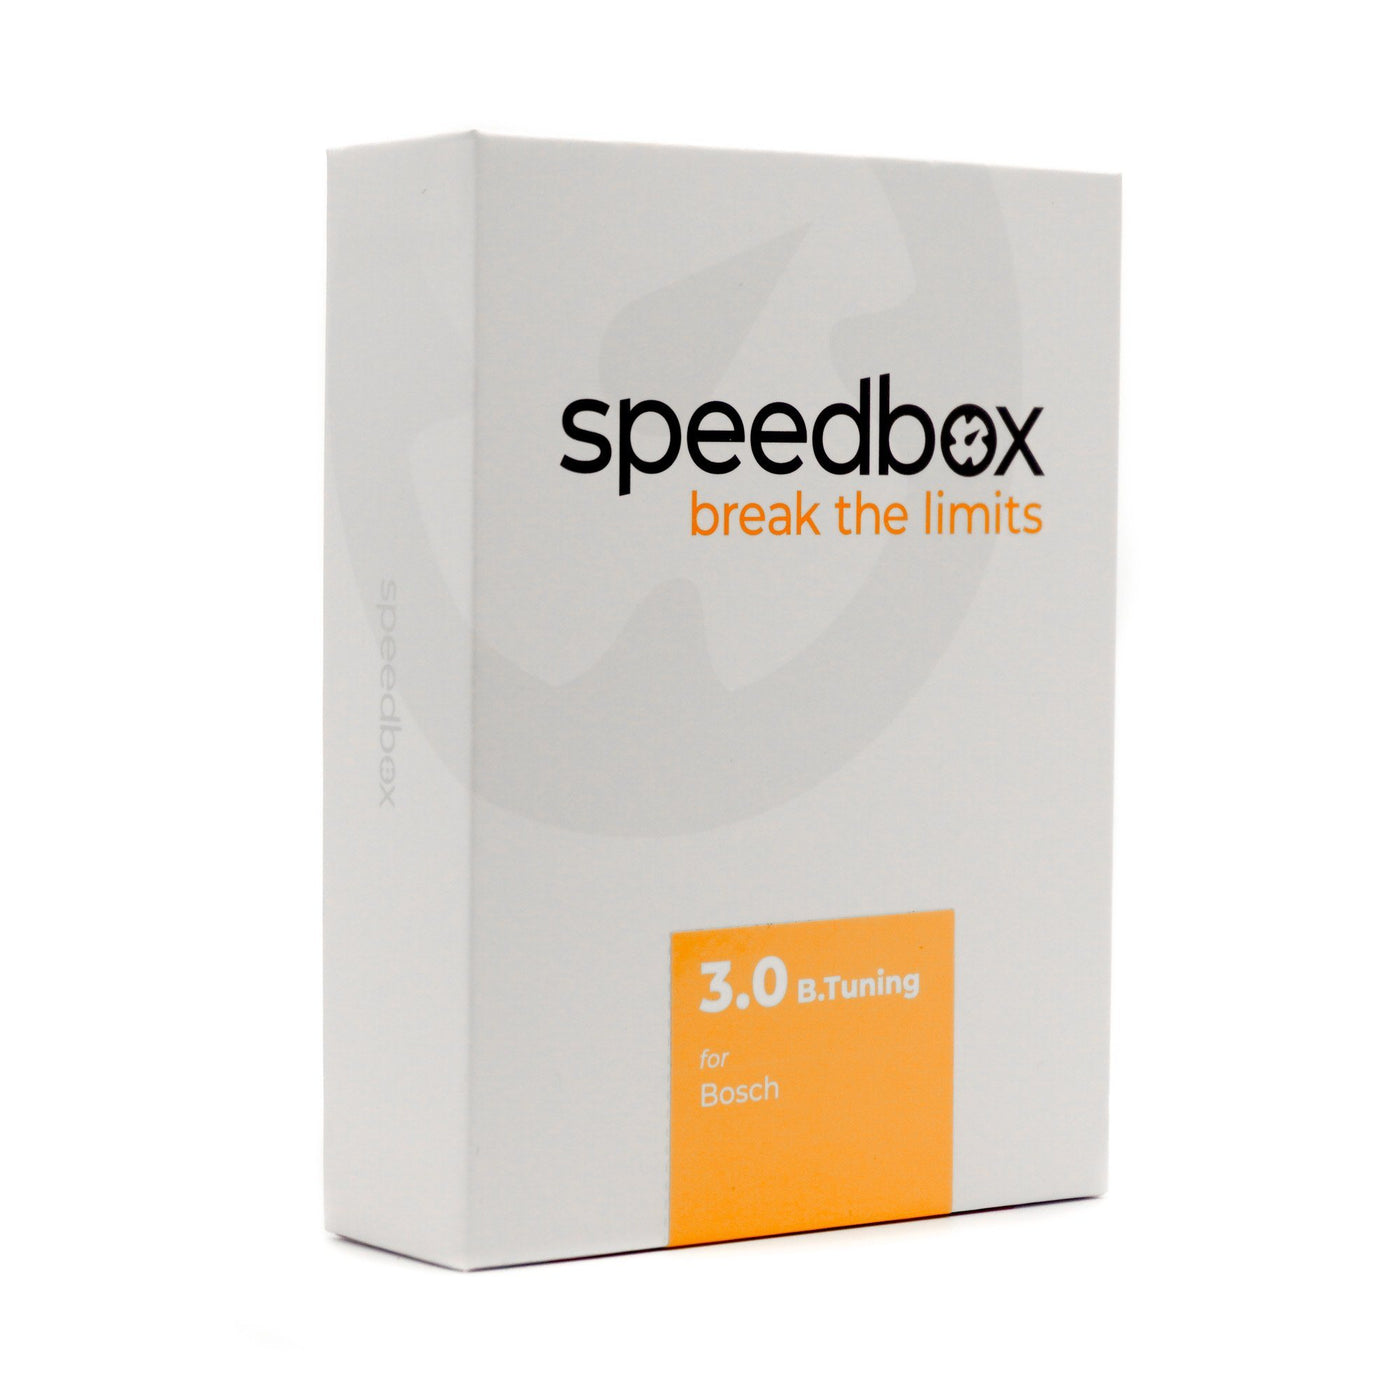  SPEEDBOX 3 B.Tuning 2020 (Anti-Theft) ebike Tuning and Theft  Protection for Bosch Motor. : Sports & Outdoors